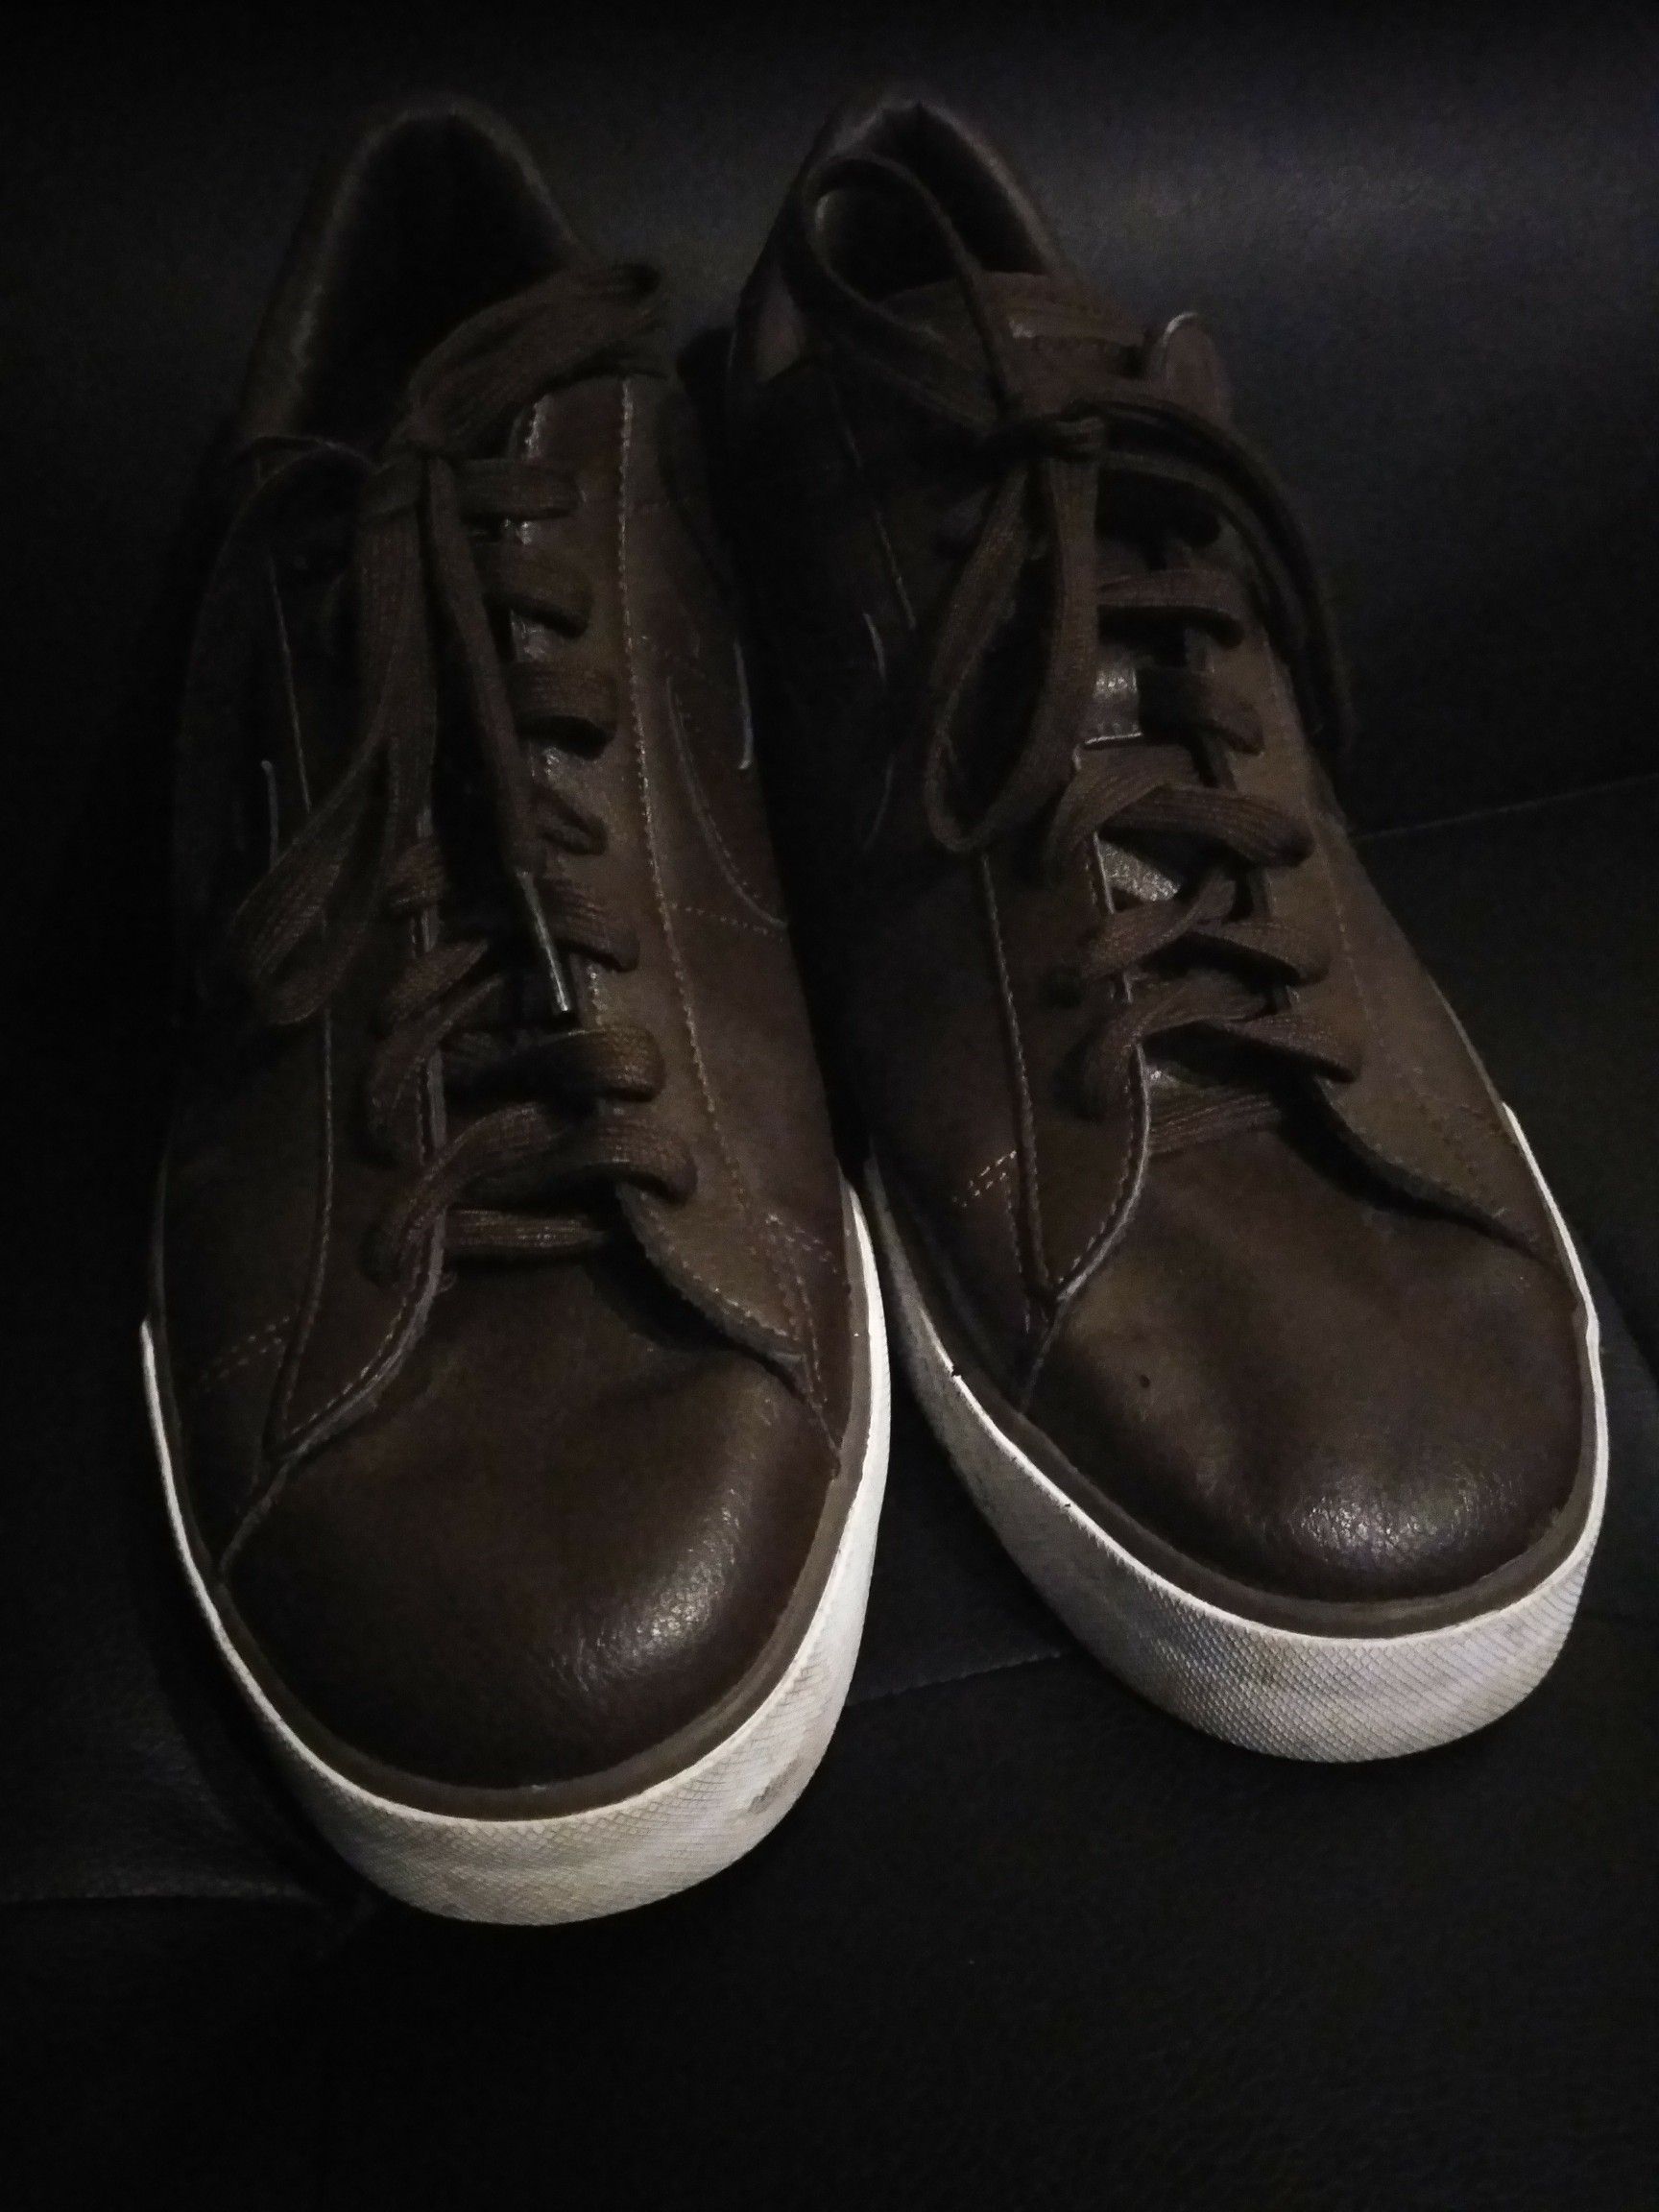 Nike Sweet Classic Low BRS Solid Brown All Leather Shoes Men's 12 for Sale in Antonio, TX - OfferUp